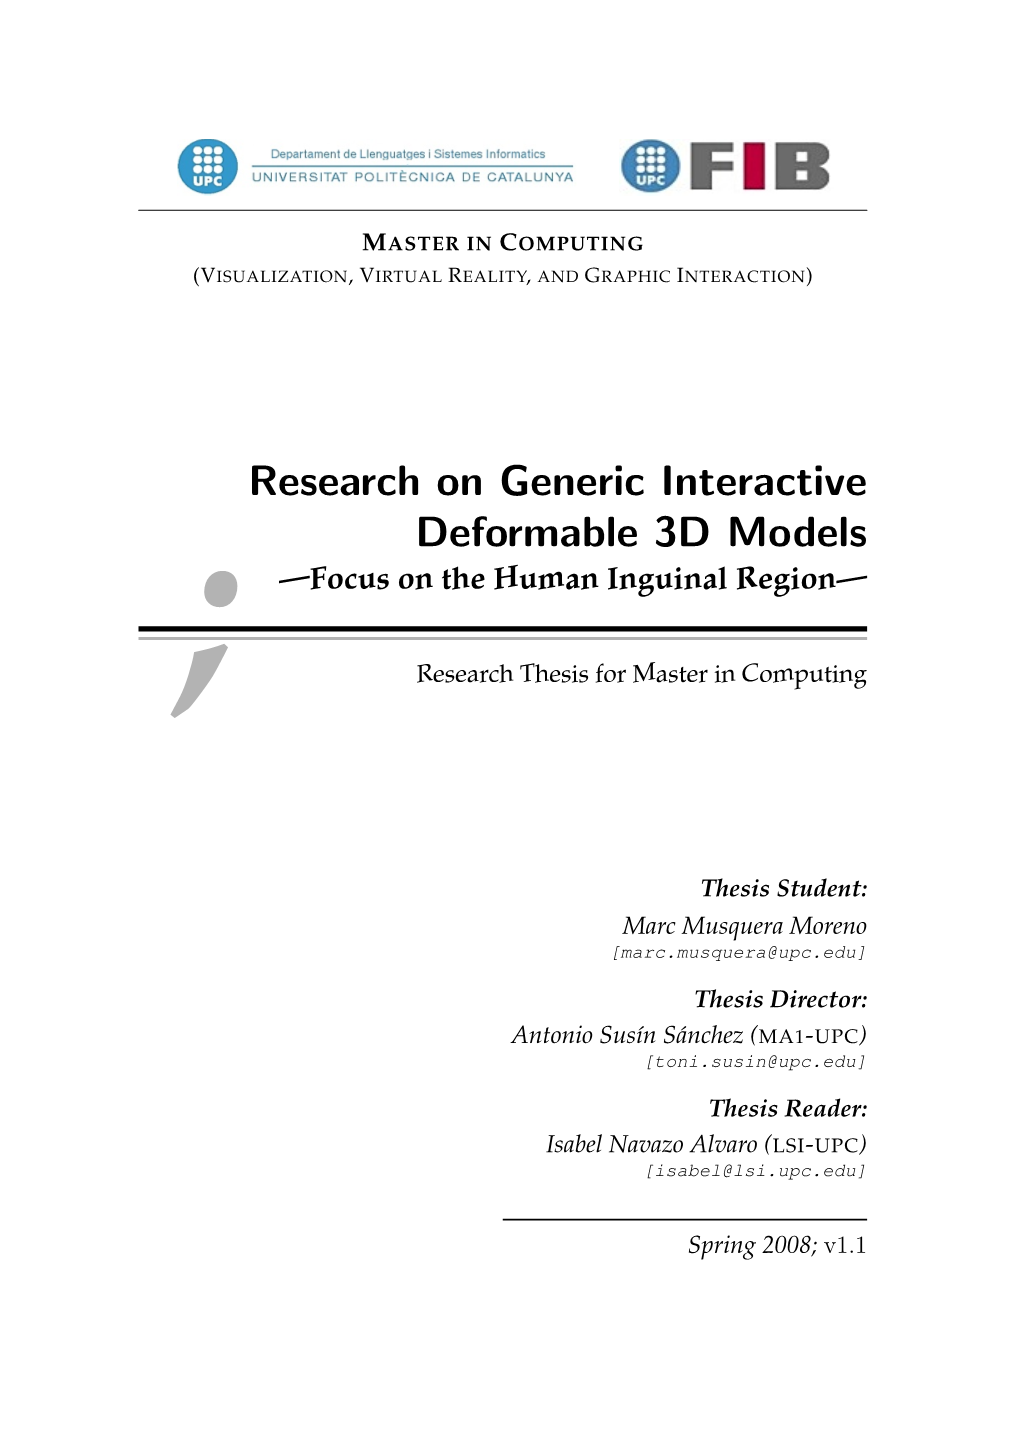 Research on Generic Interactive Deformable 3D Models —Focus on the Human Inguinal Region— ; Research Thesis for Master in Computing